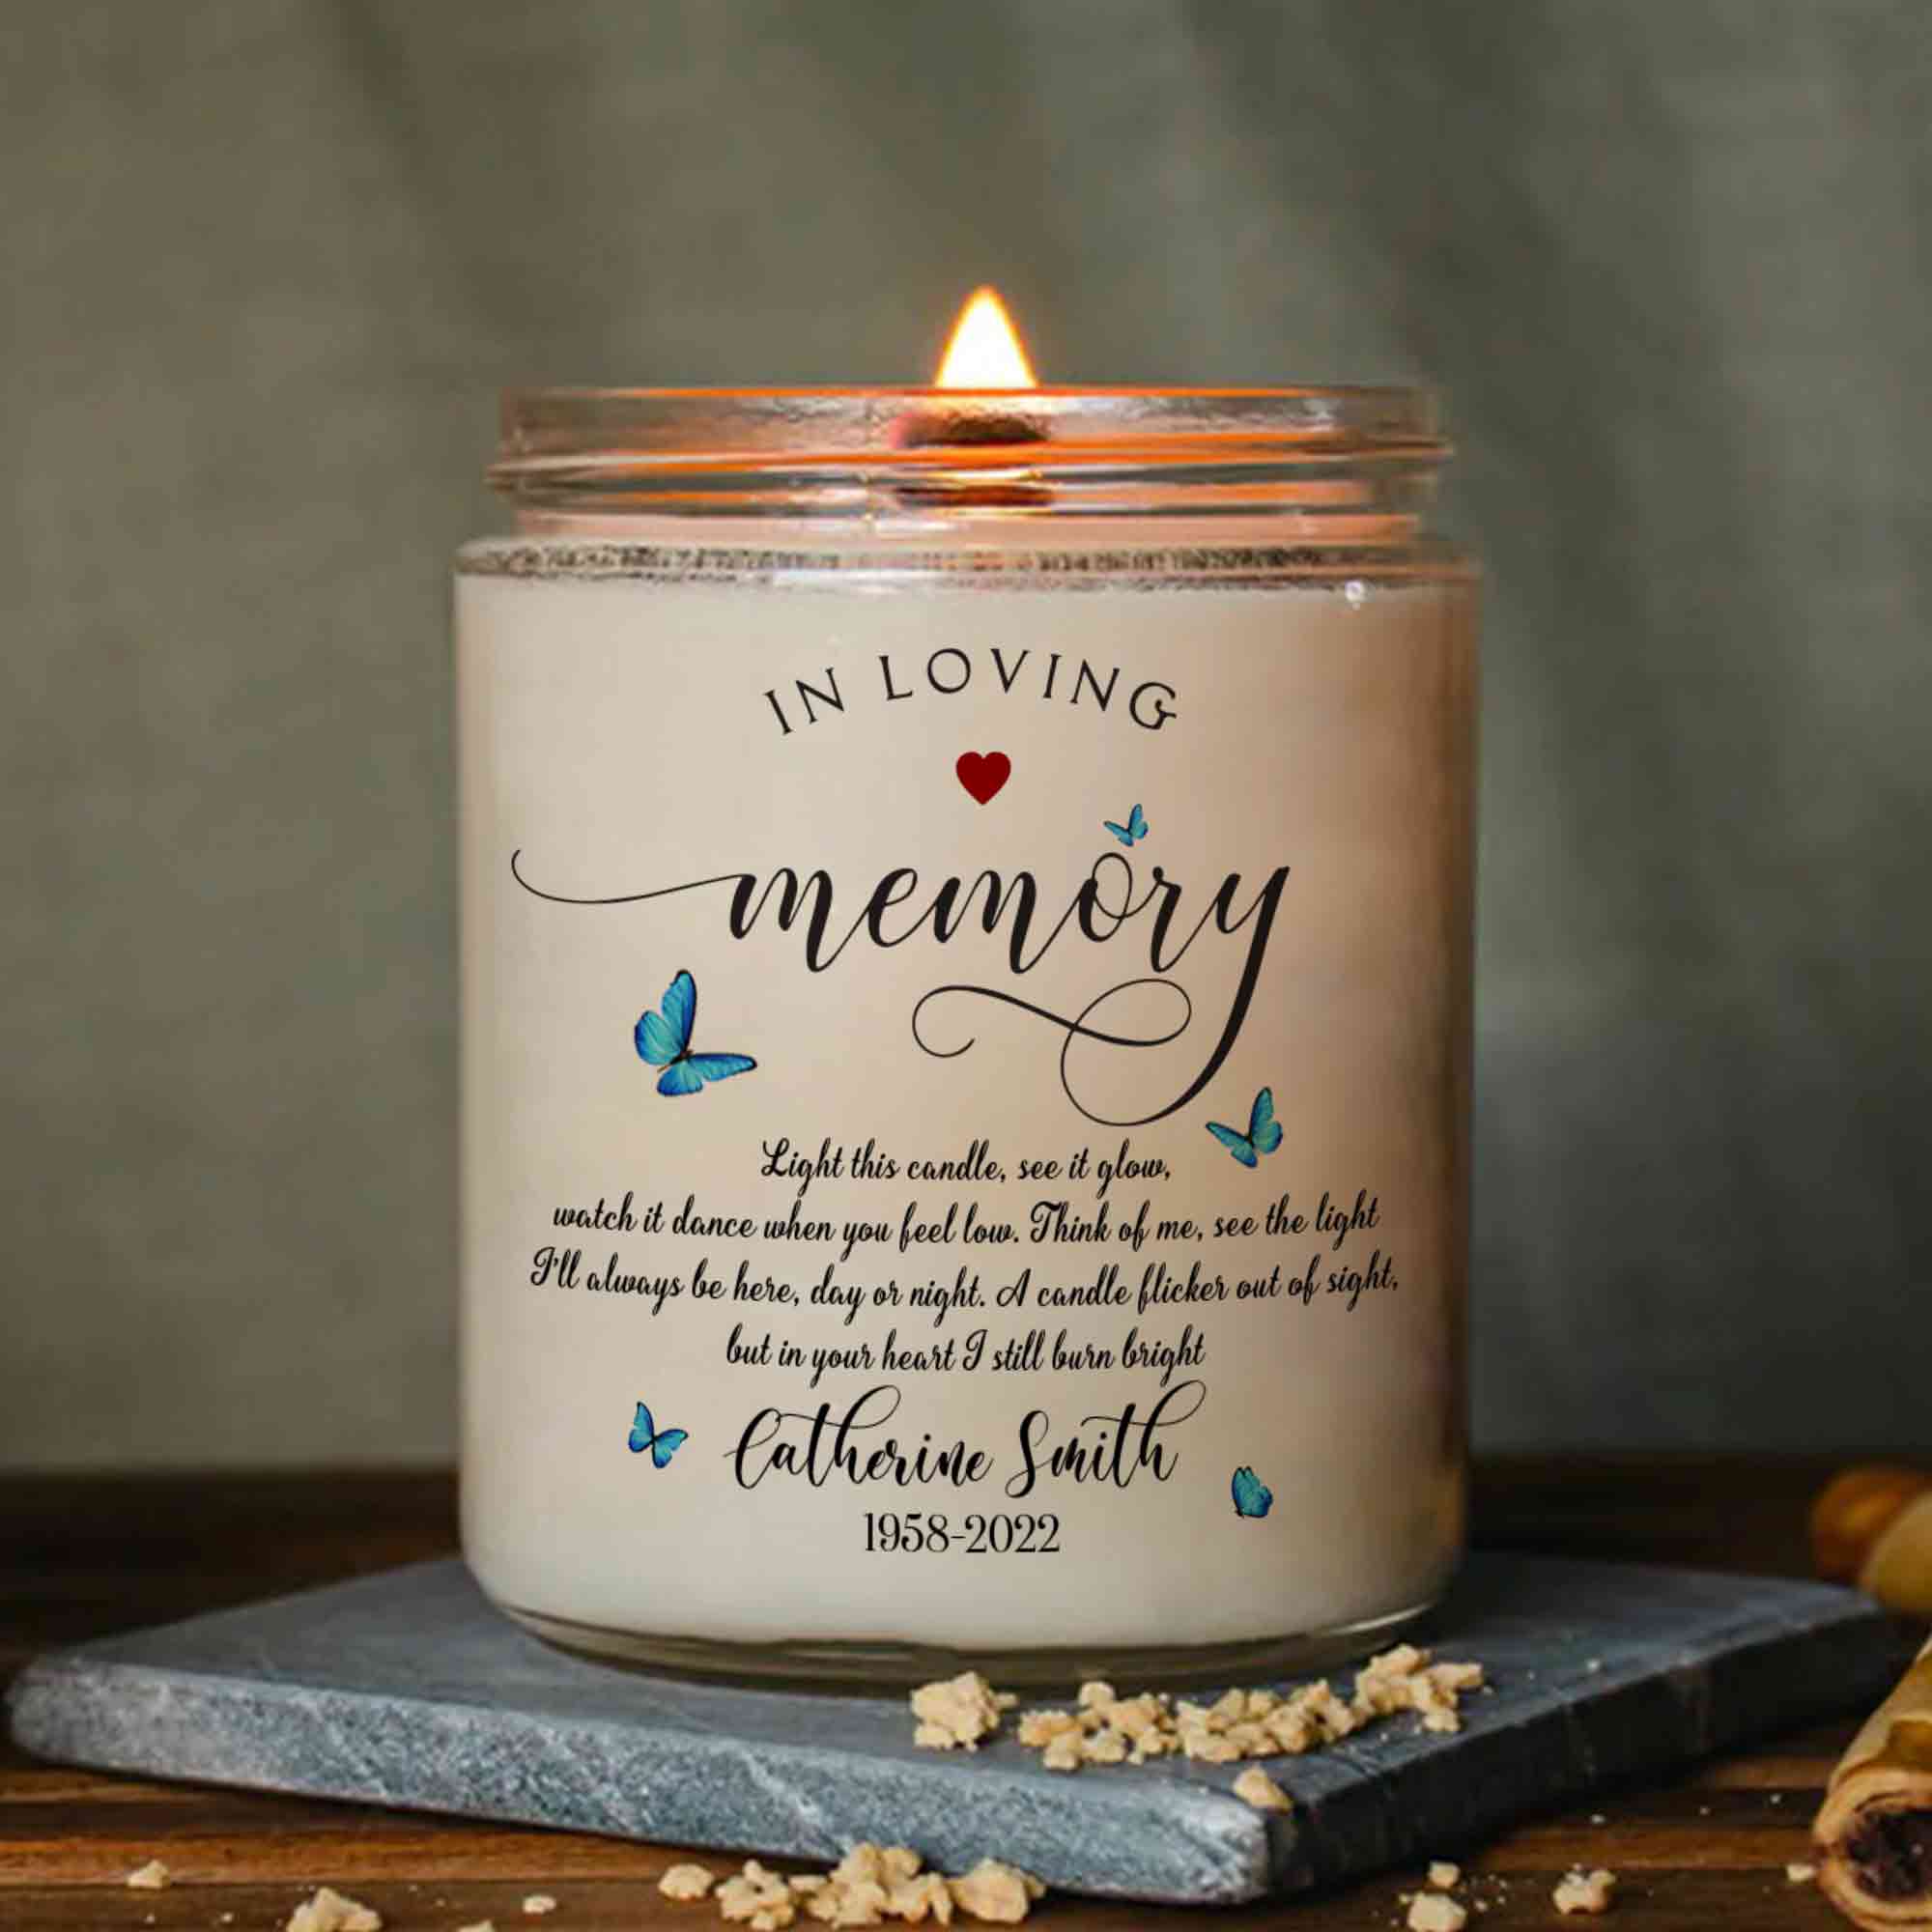 In Loving Memory Candle, Personalized Memorial Candle Condolence Gift, Sympathy Candle Gifts